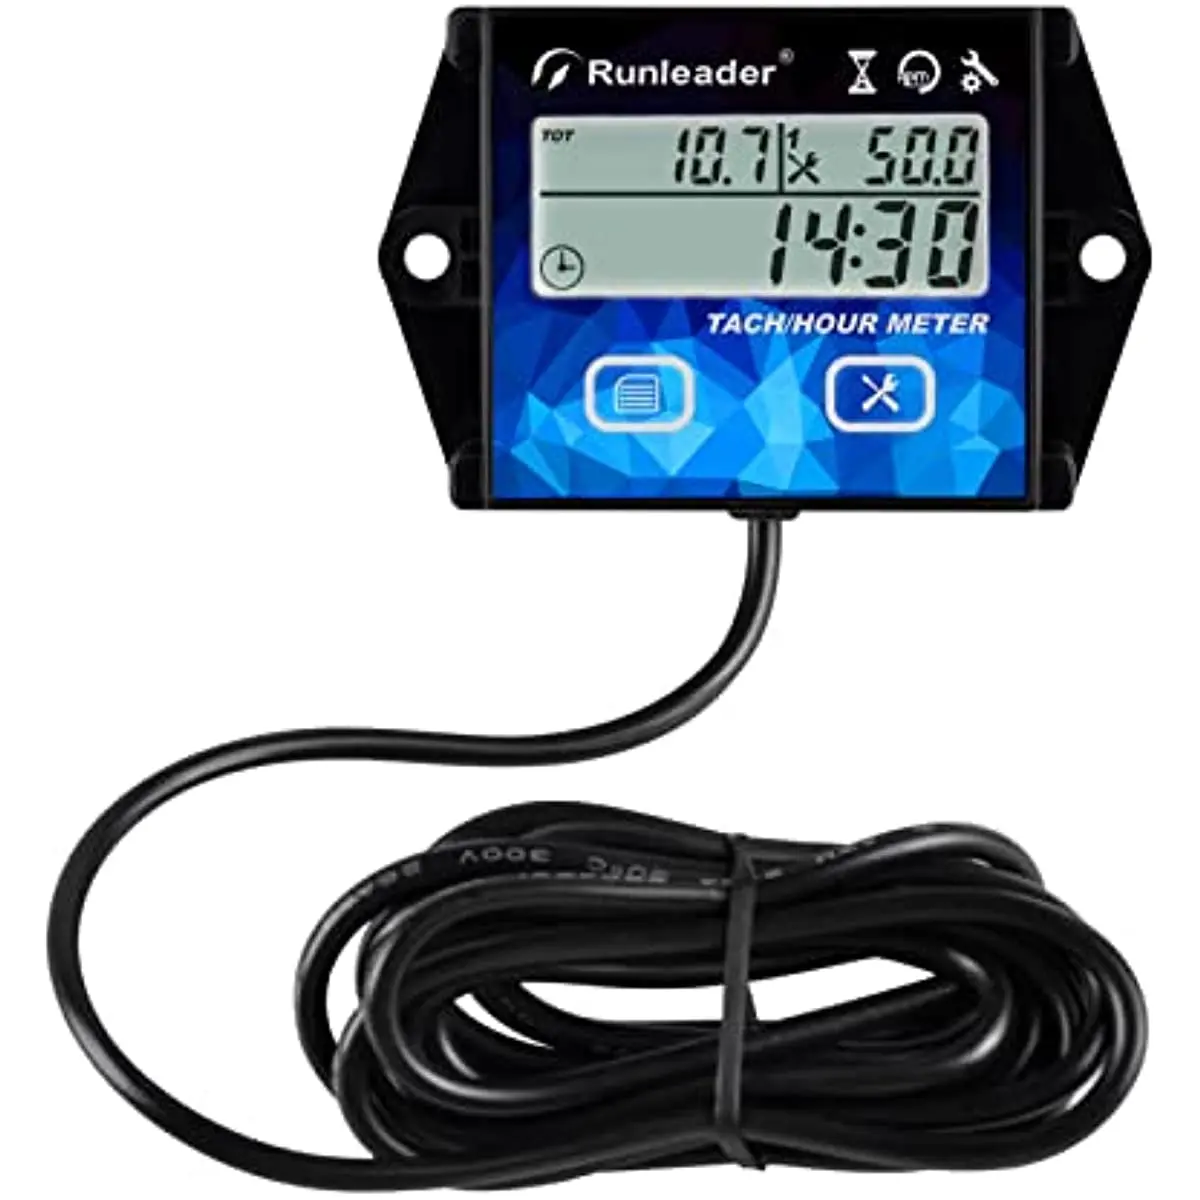 R maintenance reminder multiple display with backlight for atv outboard motor motorbike thumb200